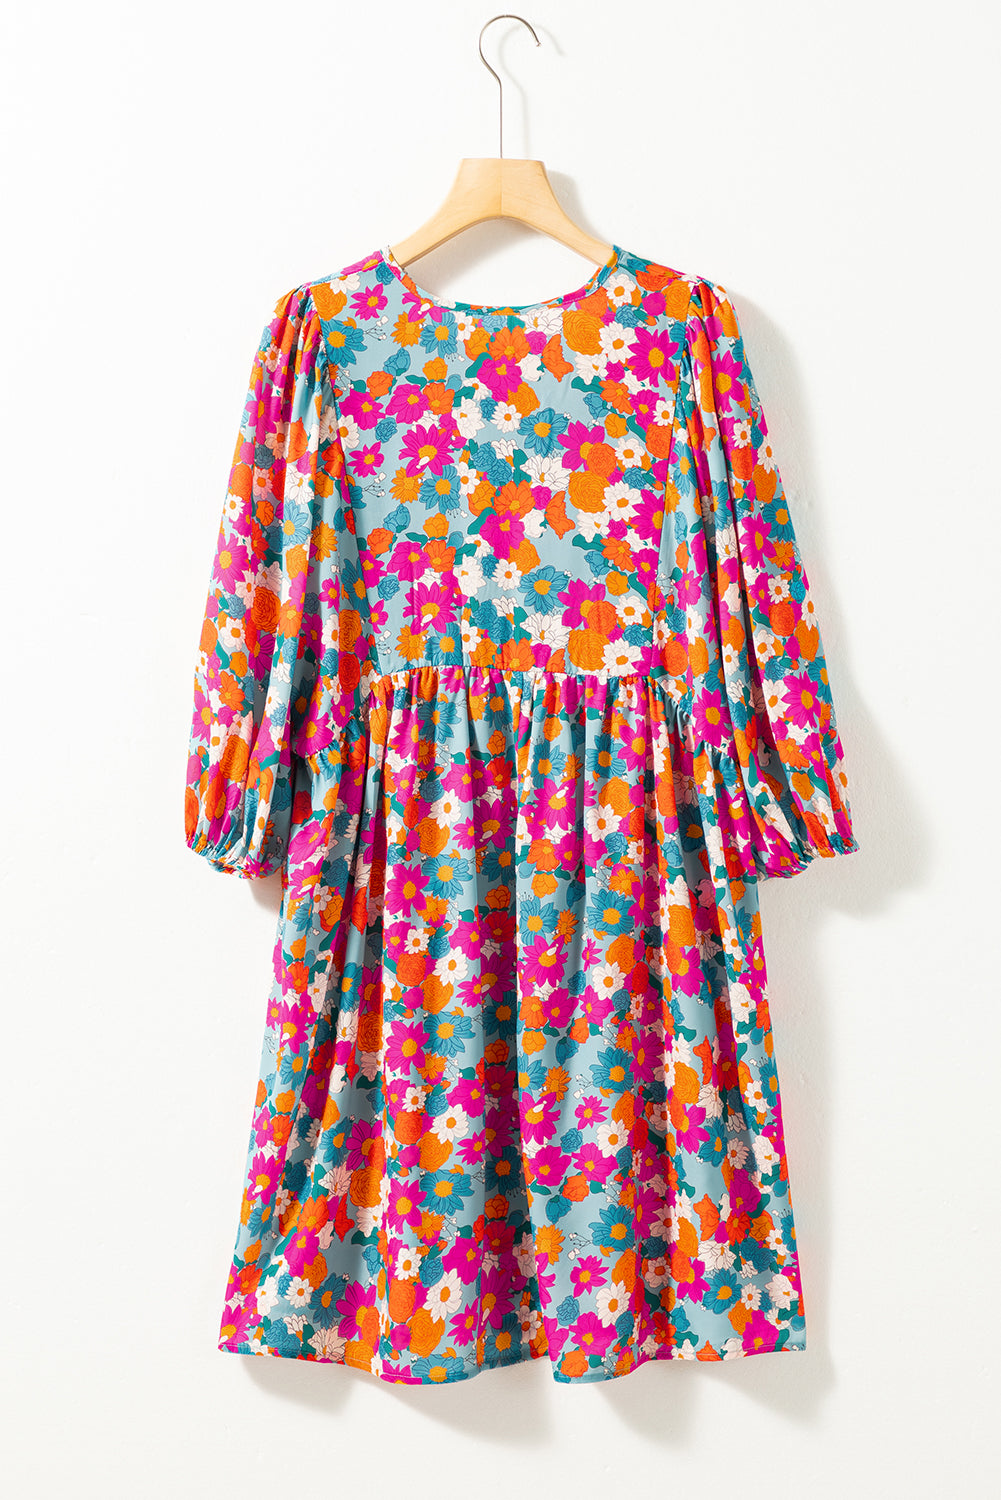 Sky Blue Floral Babydoll Dress - Tie Neck & Bubble Sleeves